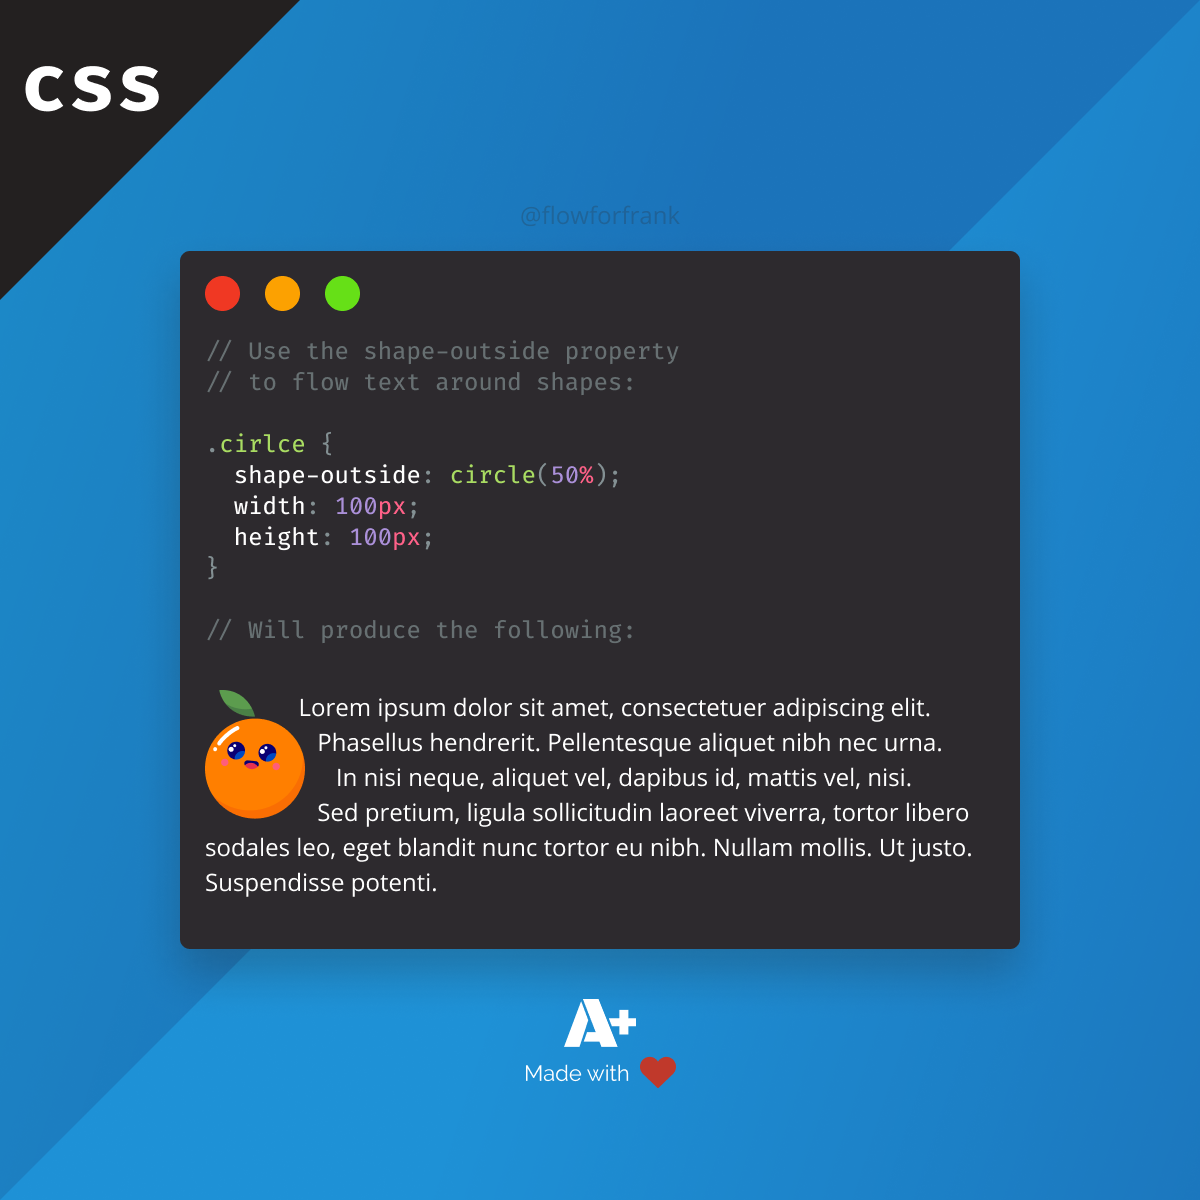 How to Flow Text Around Shapes in CSS